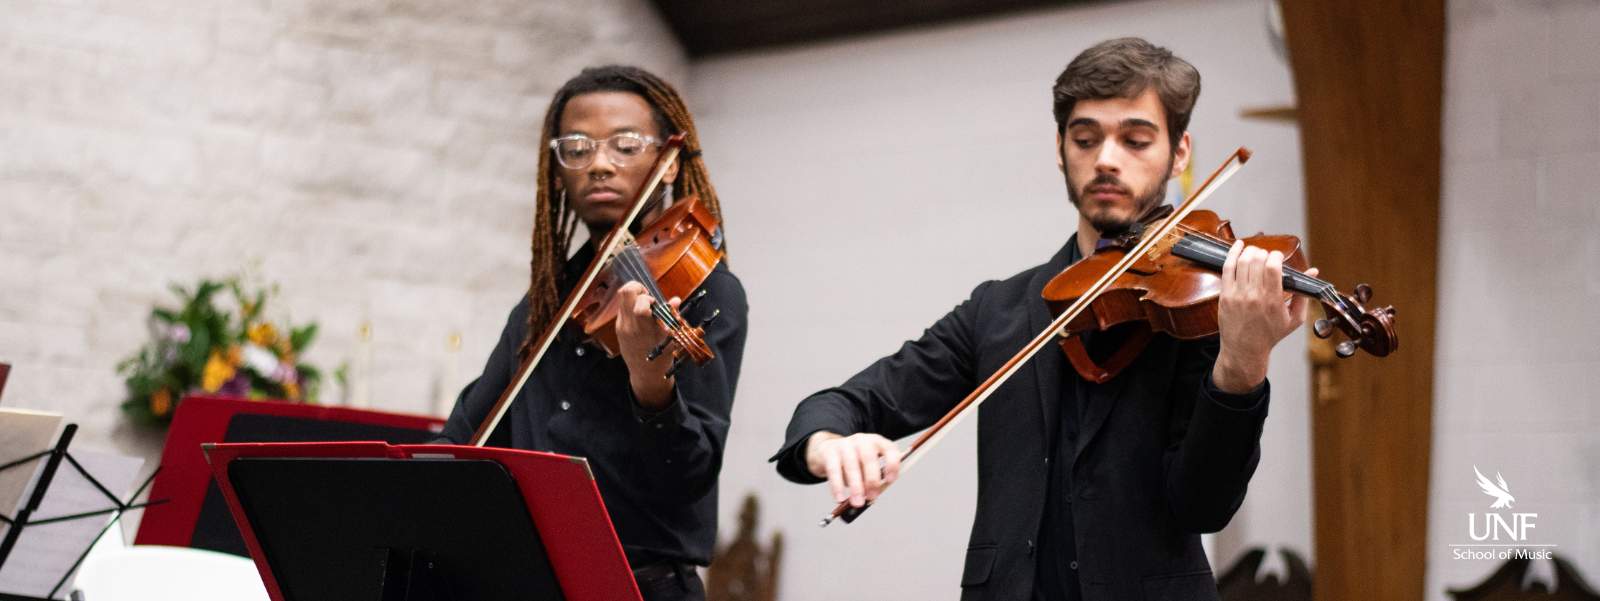 Two young men playing violas.